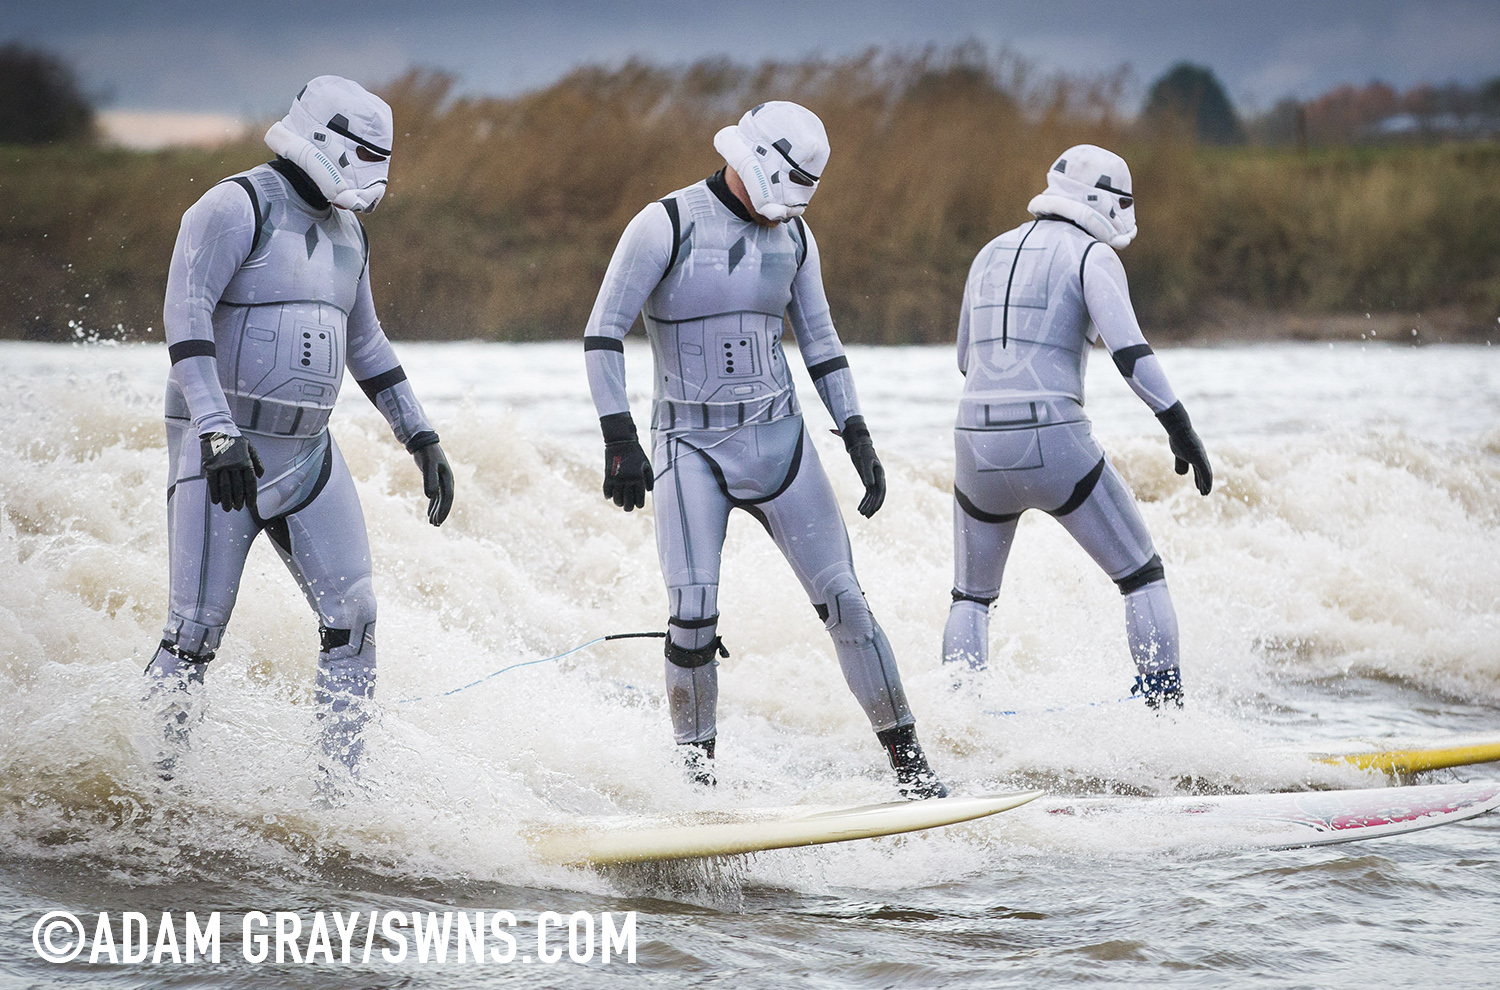 Surfers dressed as Star Wars Stormtroopers ride the Severn Bore in Gloucestershire. 27 November 2015. See SWNS story SWTROOPER: There was an unworldly sight in the Forest of Dean this morning (Friday 27th November) when a trio of Star Wars Stormtroopers surfed the spectacular Severn Bore. Key scenes from the upcoming Star Wars episode VII were filmed in nearby Puzzlewood and can be seen several times in the trailer. Swapping the Death Star for surfboards, the elite soldiers of the Galactic Empire took to the waves to mark the release of the highly anticipated new Star Wars film and a new TV & Movie Trail. The Forest of Dean’s atmospheric and picturesque location provided a natural stage for the film, which director J.J Abrams referenced in a thank you letter to all of the movie's cast and crew.